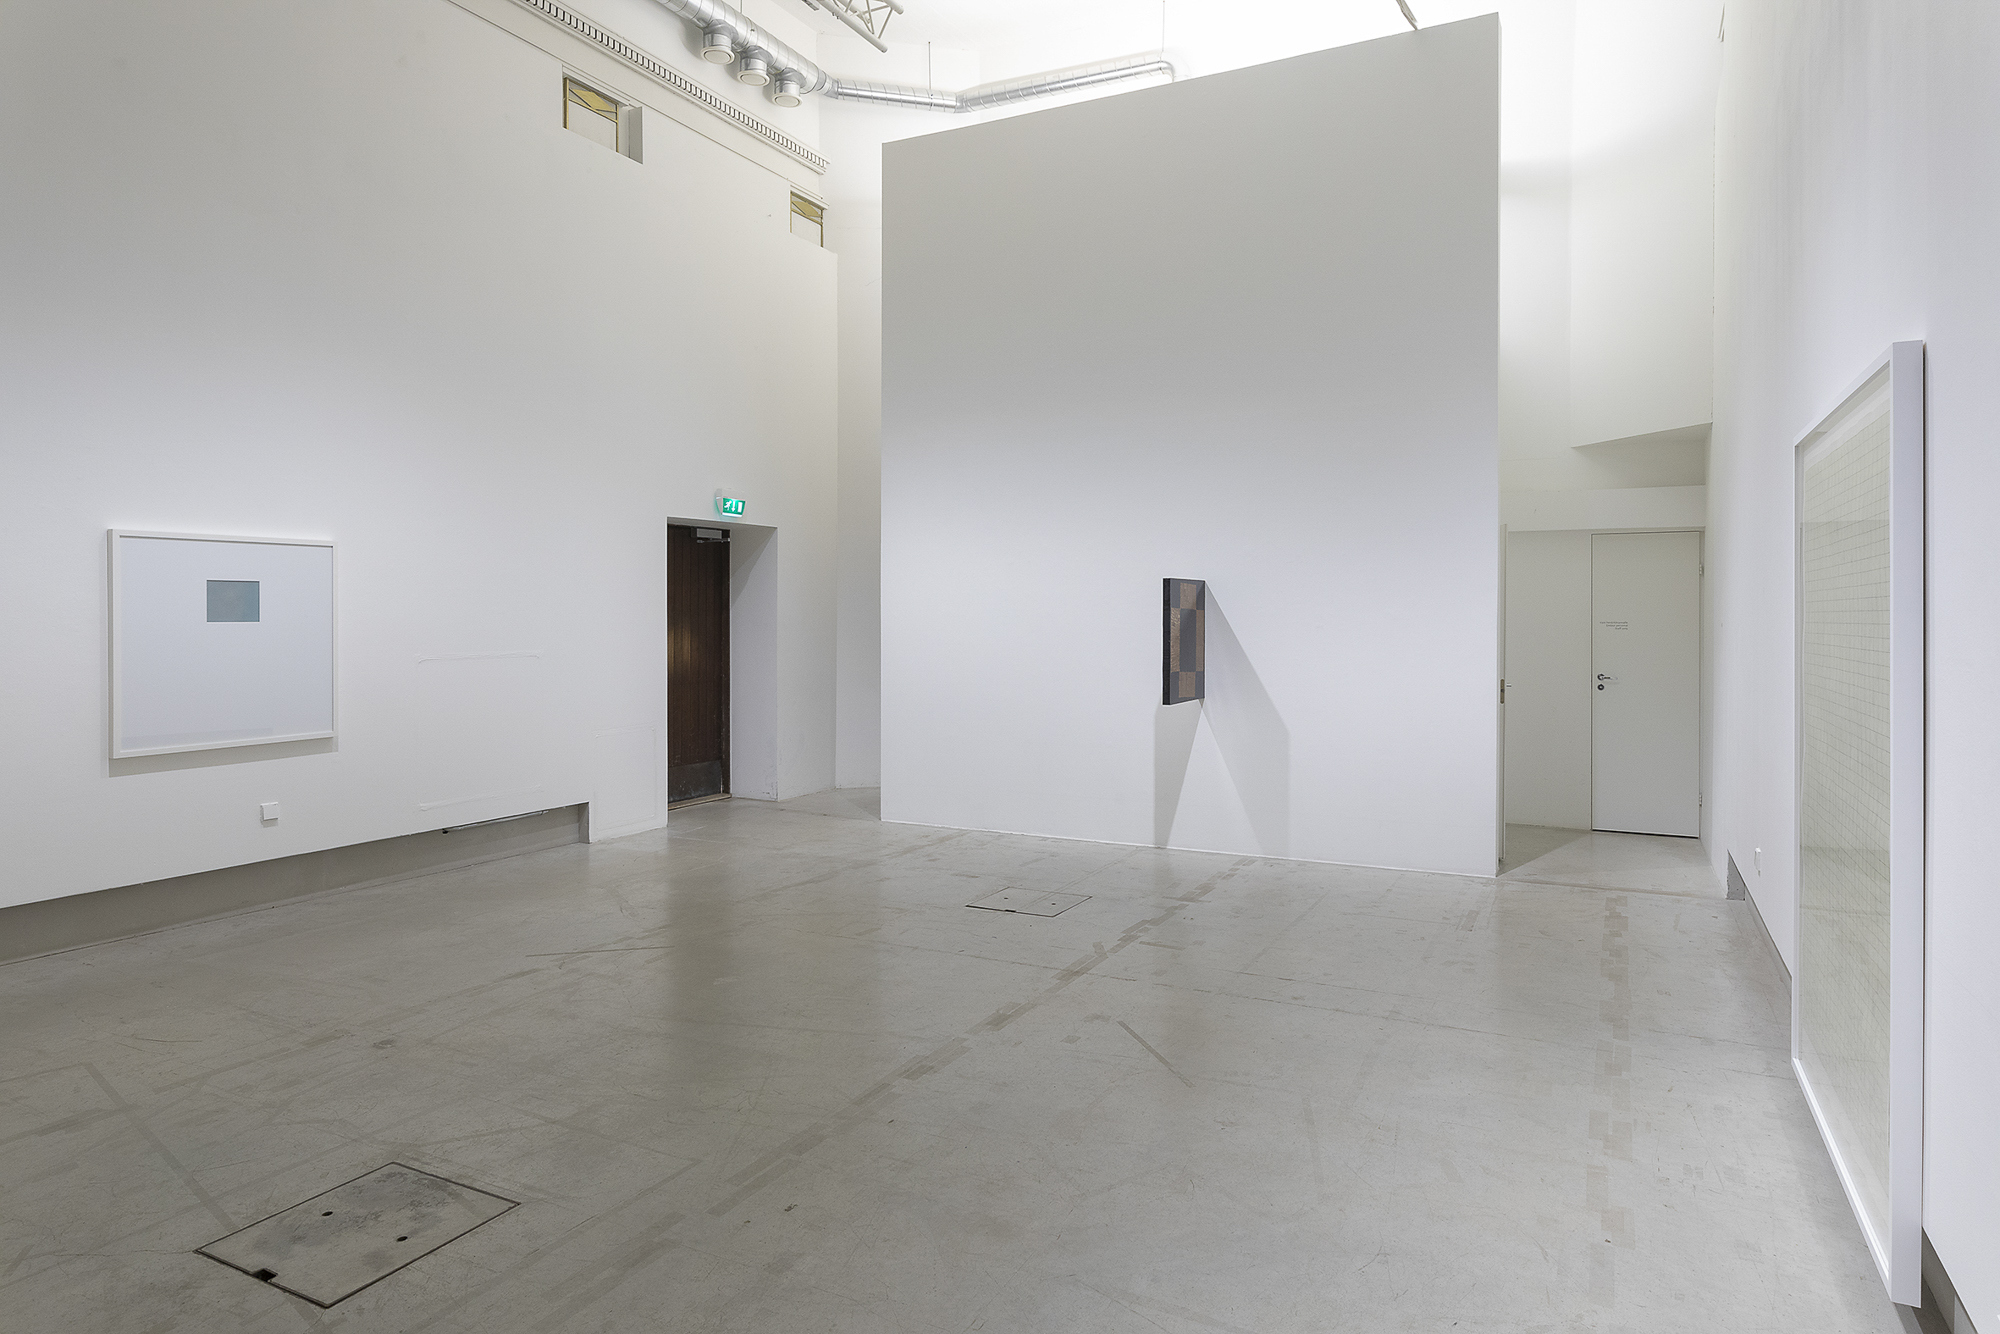 Installation view: Y, gallery Hippolyte